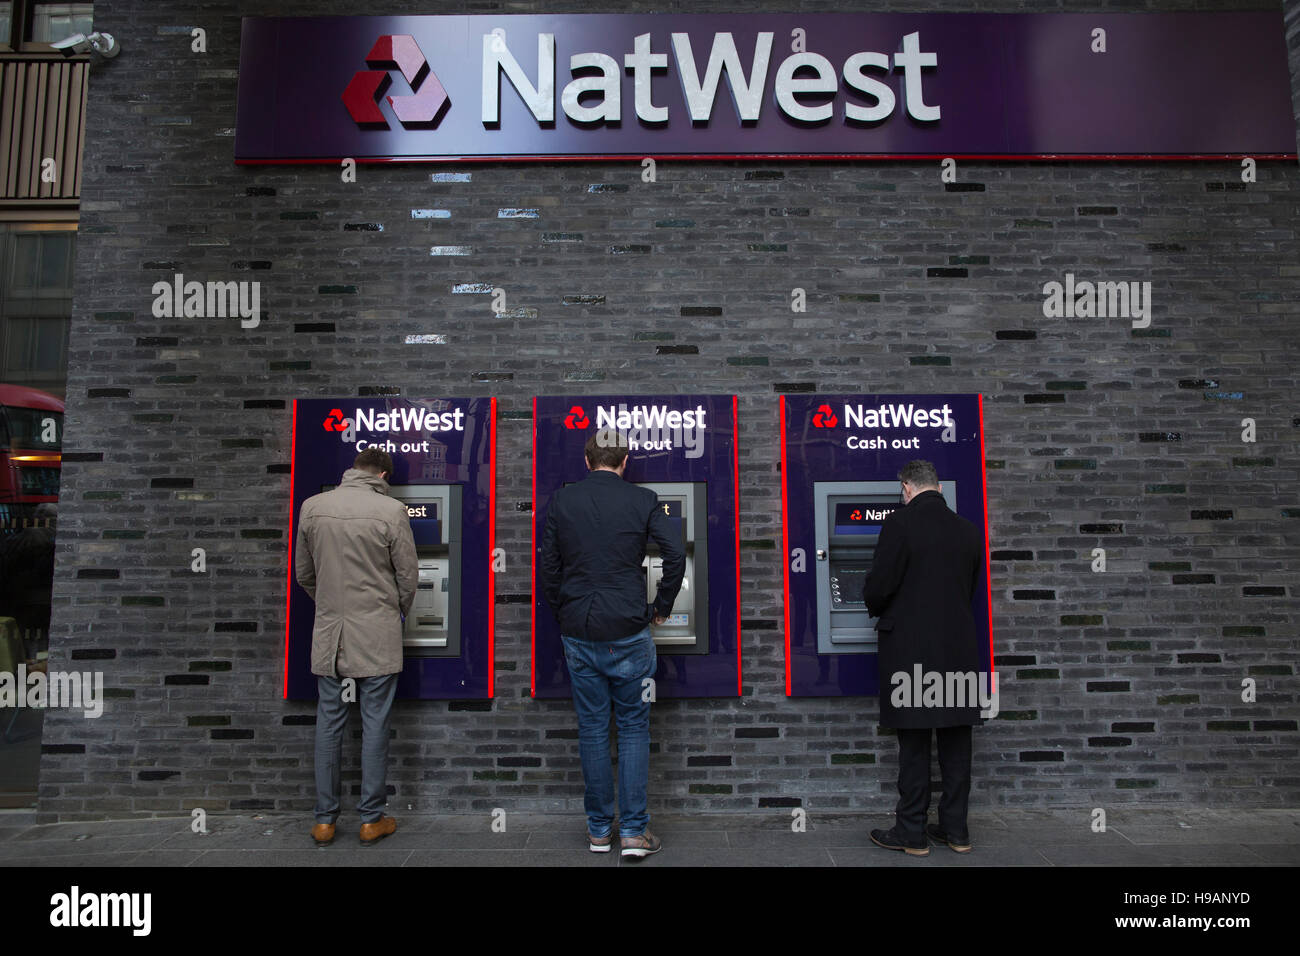 Three men making a cash withdrawal at NatWest banking cash dispensing machines, Victoria Street, Central London, England, UK Stock Photo